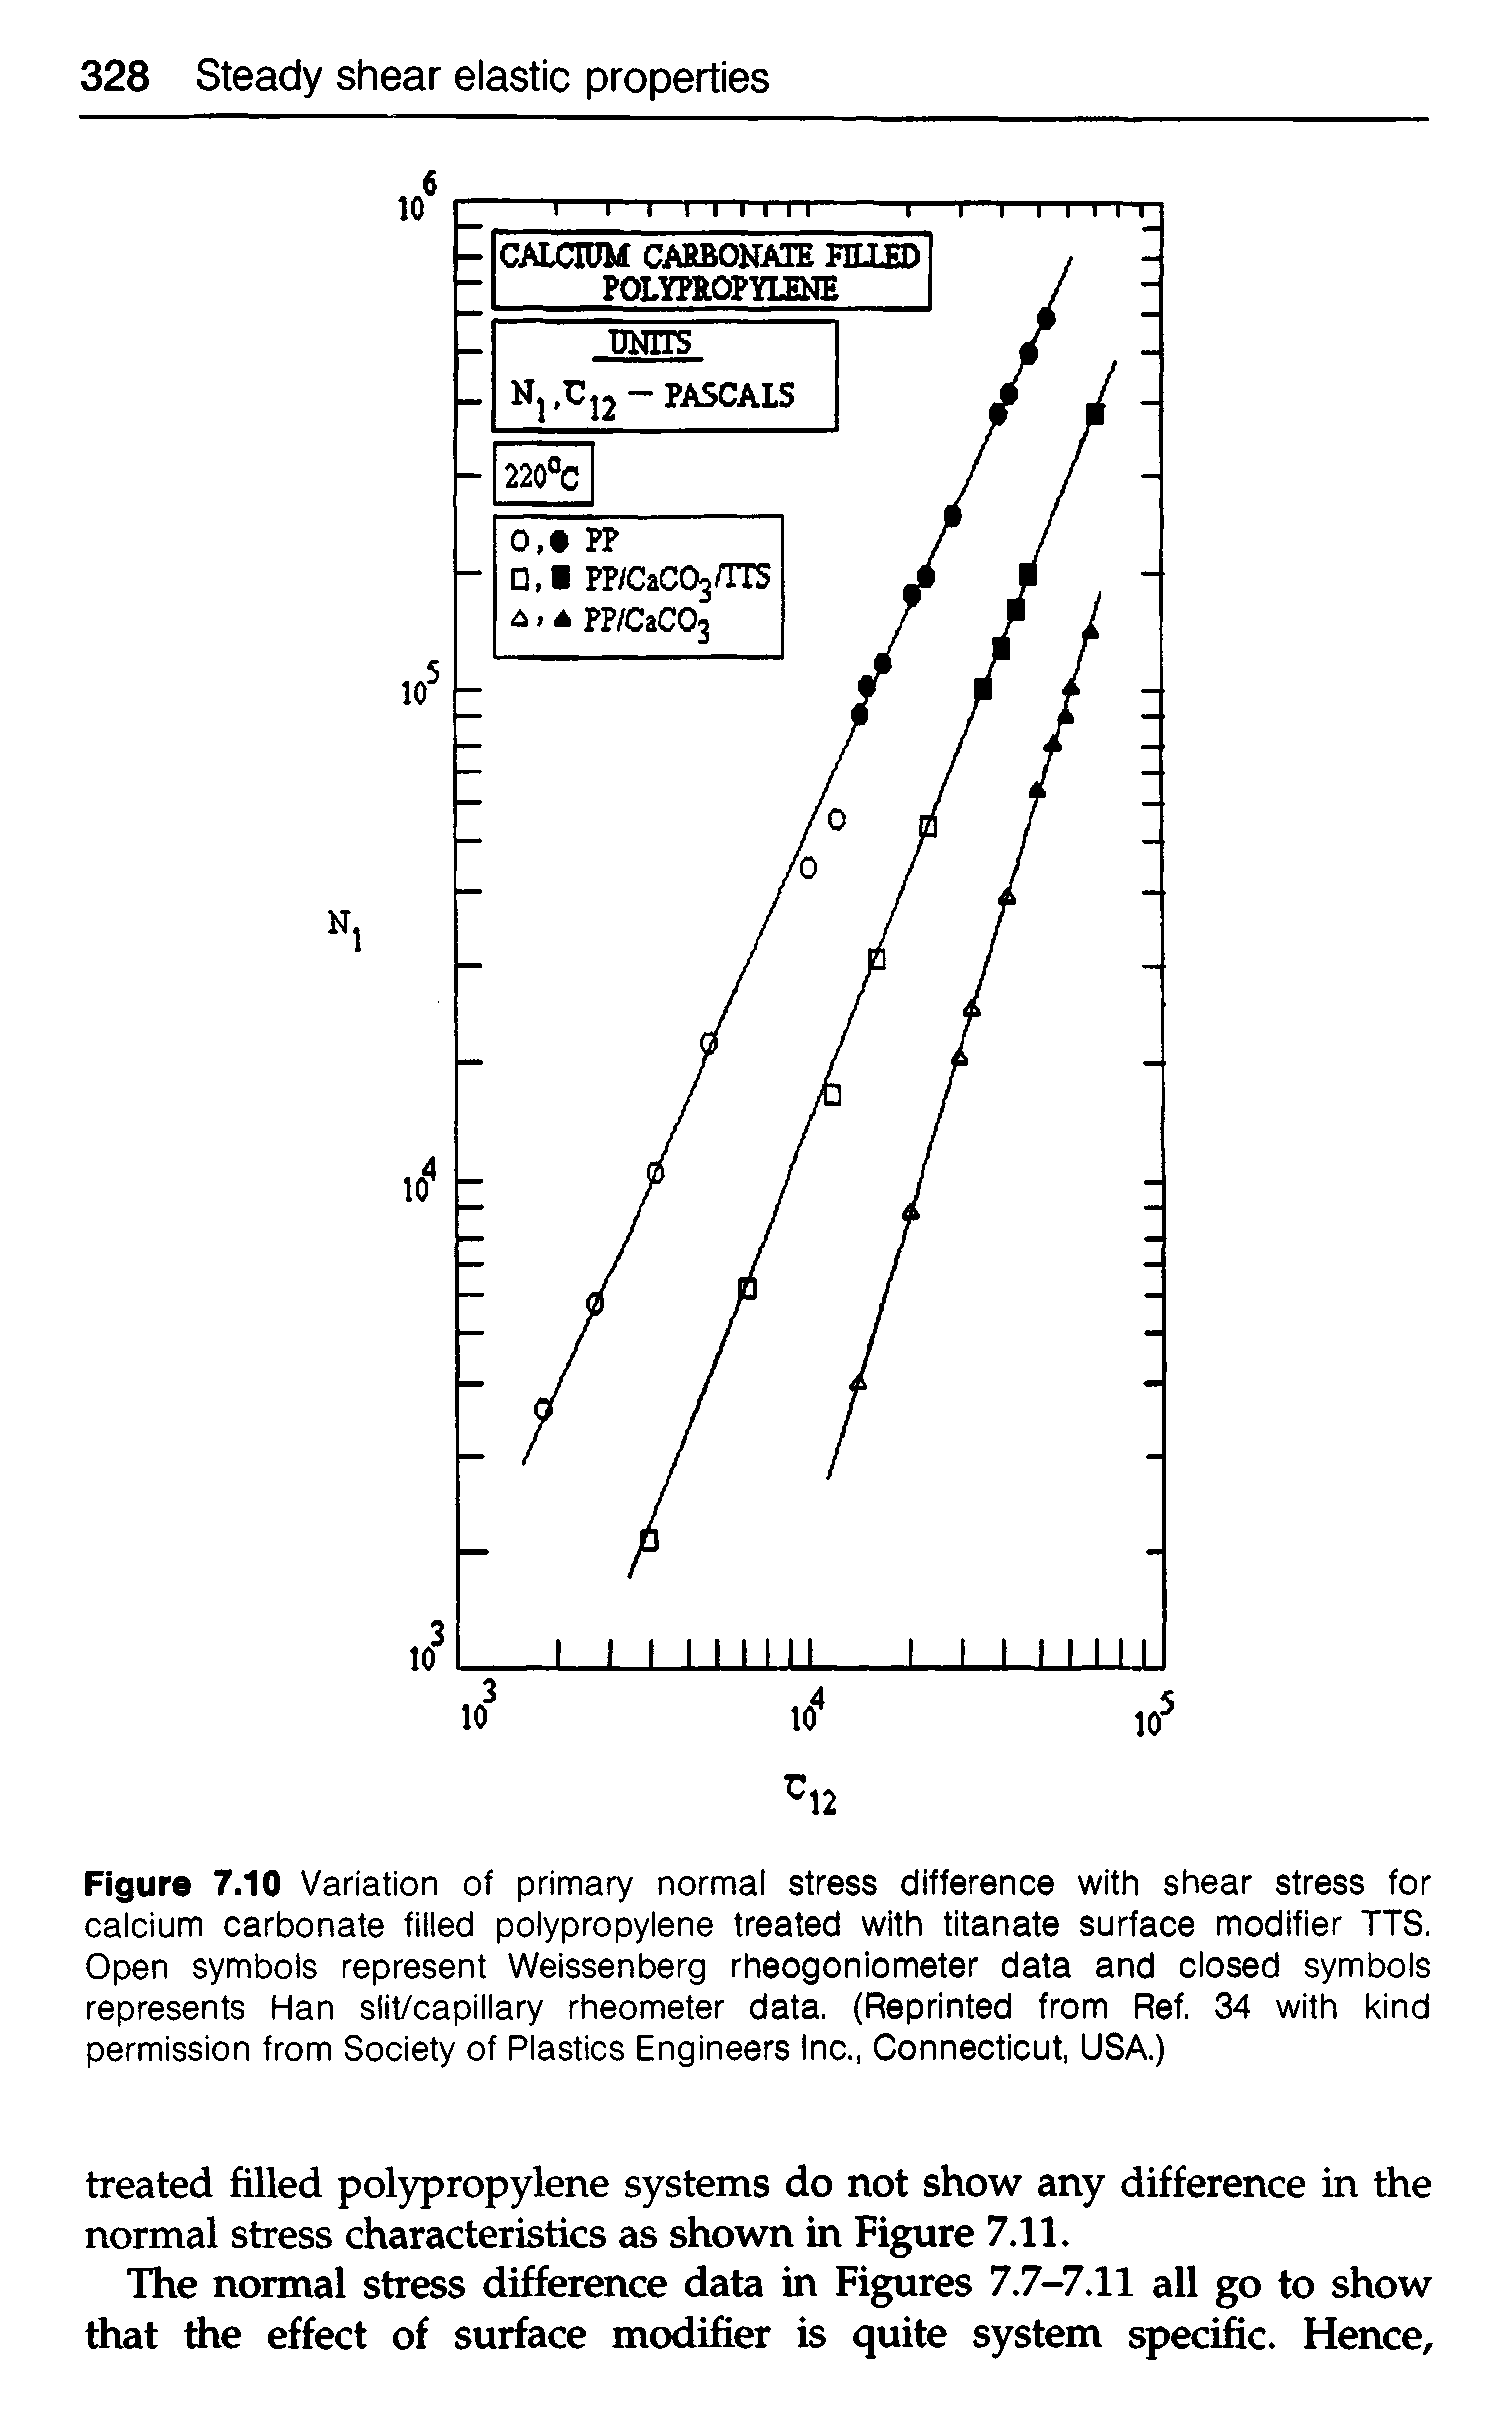 Figur 7.10 Variation of primary normal stress difference with shear stress for calcium carbonate filled polypropylene treated with titanate surface modifier ITS. Open symbols represent Weissenberg rheogoniometer data and closed symbols represents Han slit/capillary rheometer data. (Reprinted from Ref. 34 with kind permission from Society of Plastics Engineers Inc., Connecticut, USA.)...